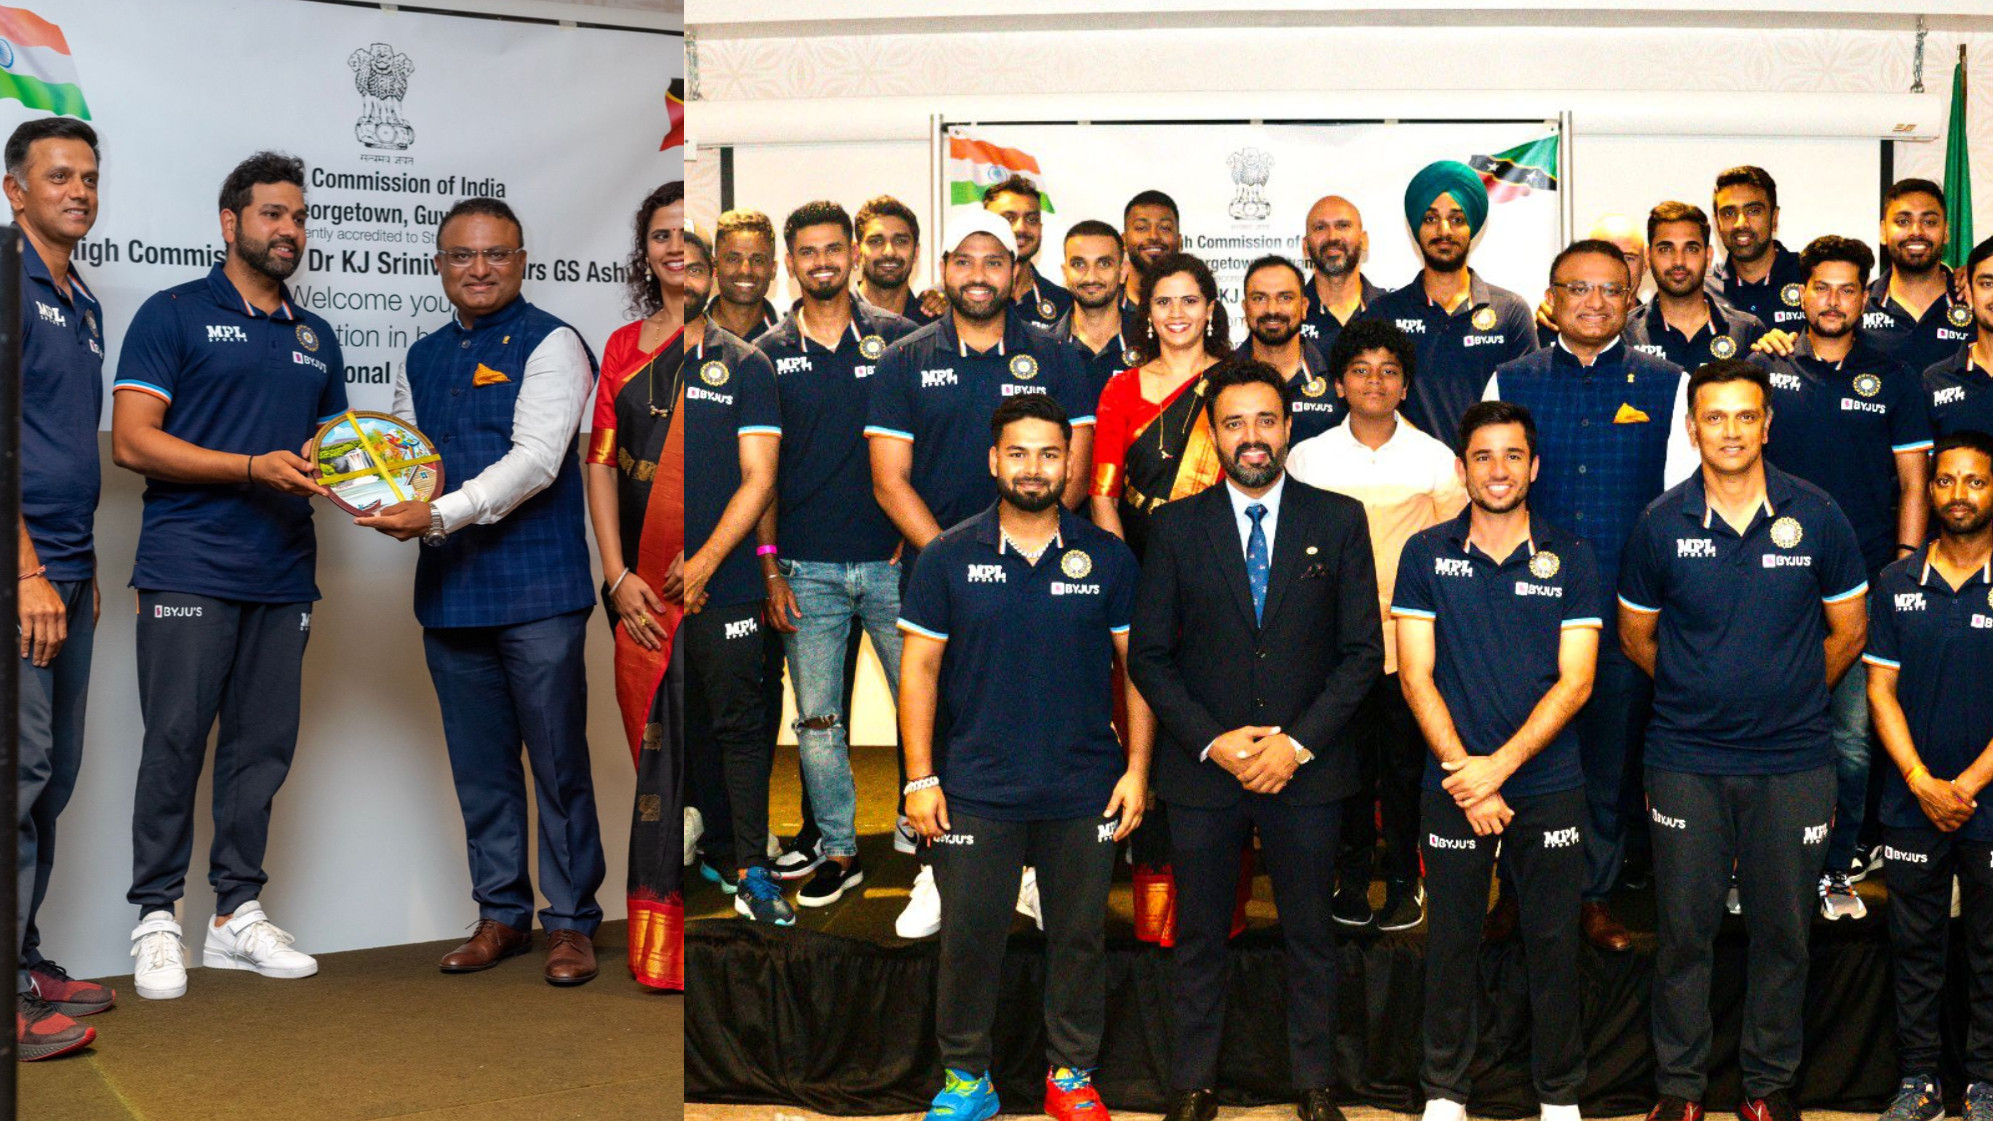 WI v IND 2022: Indian team hosted by Indian High commissioner in St. Kitts ahead of second T20I in Basseterre